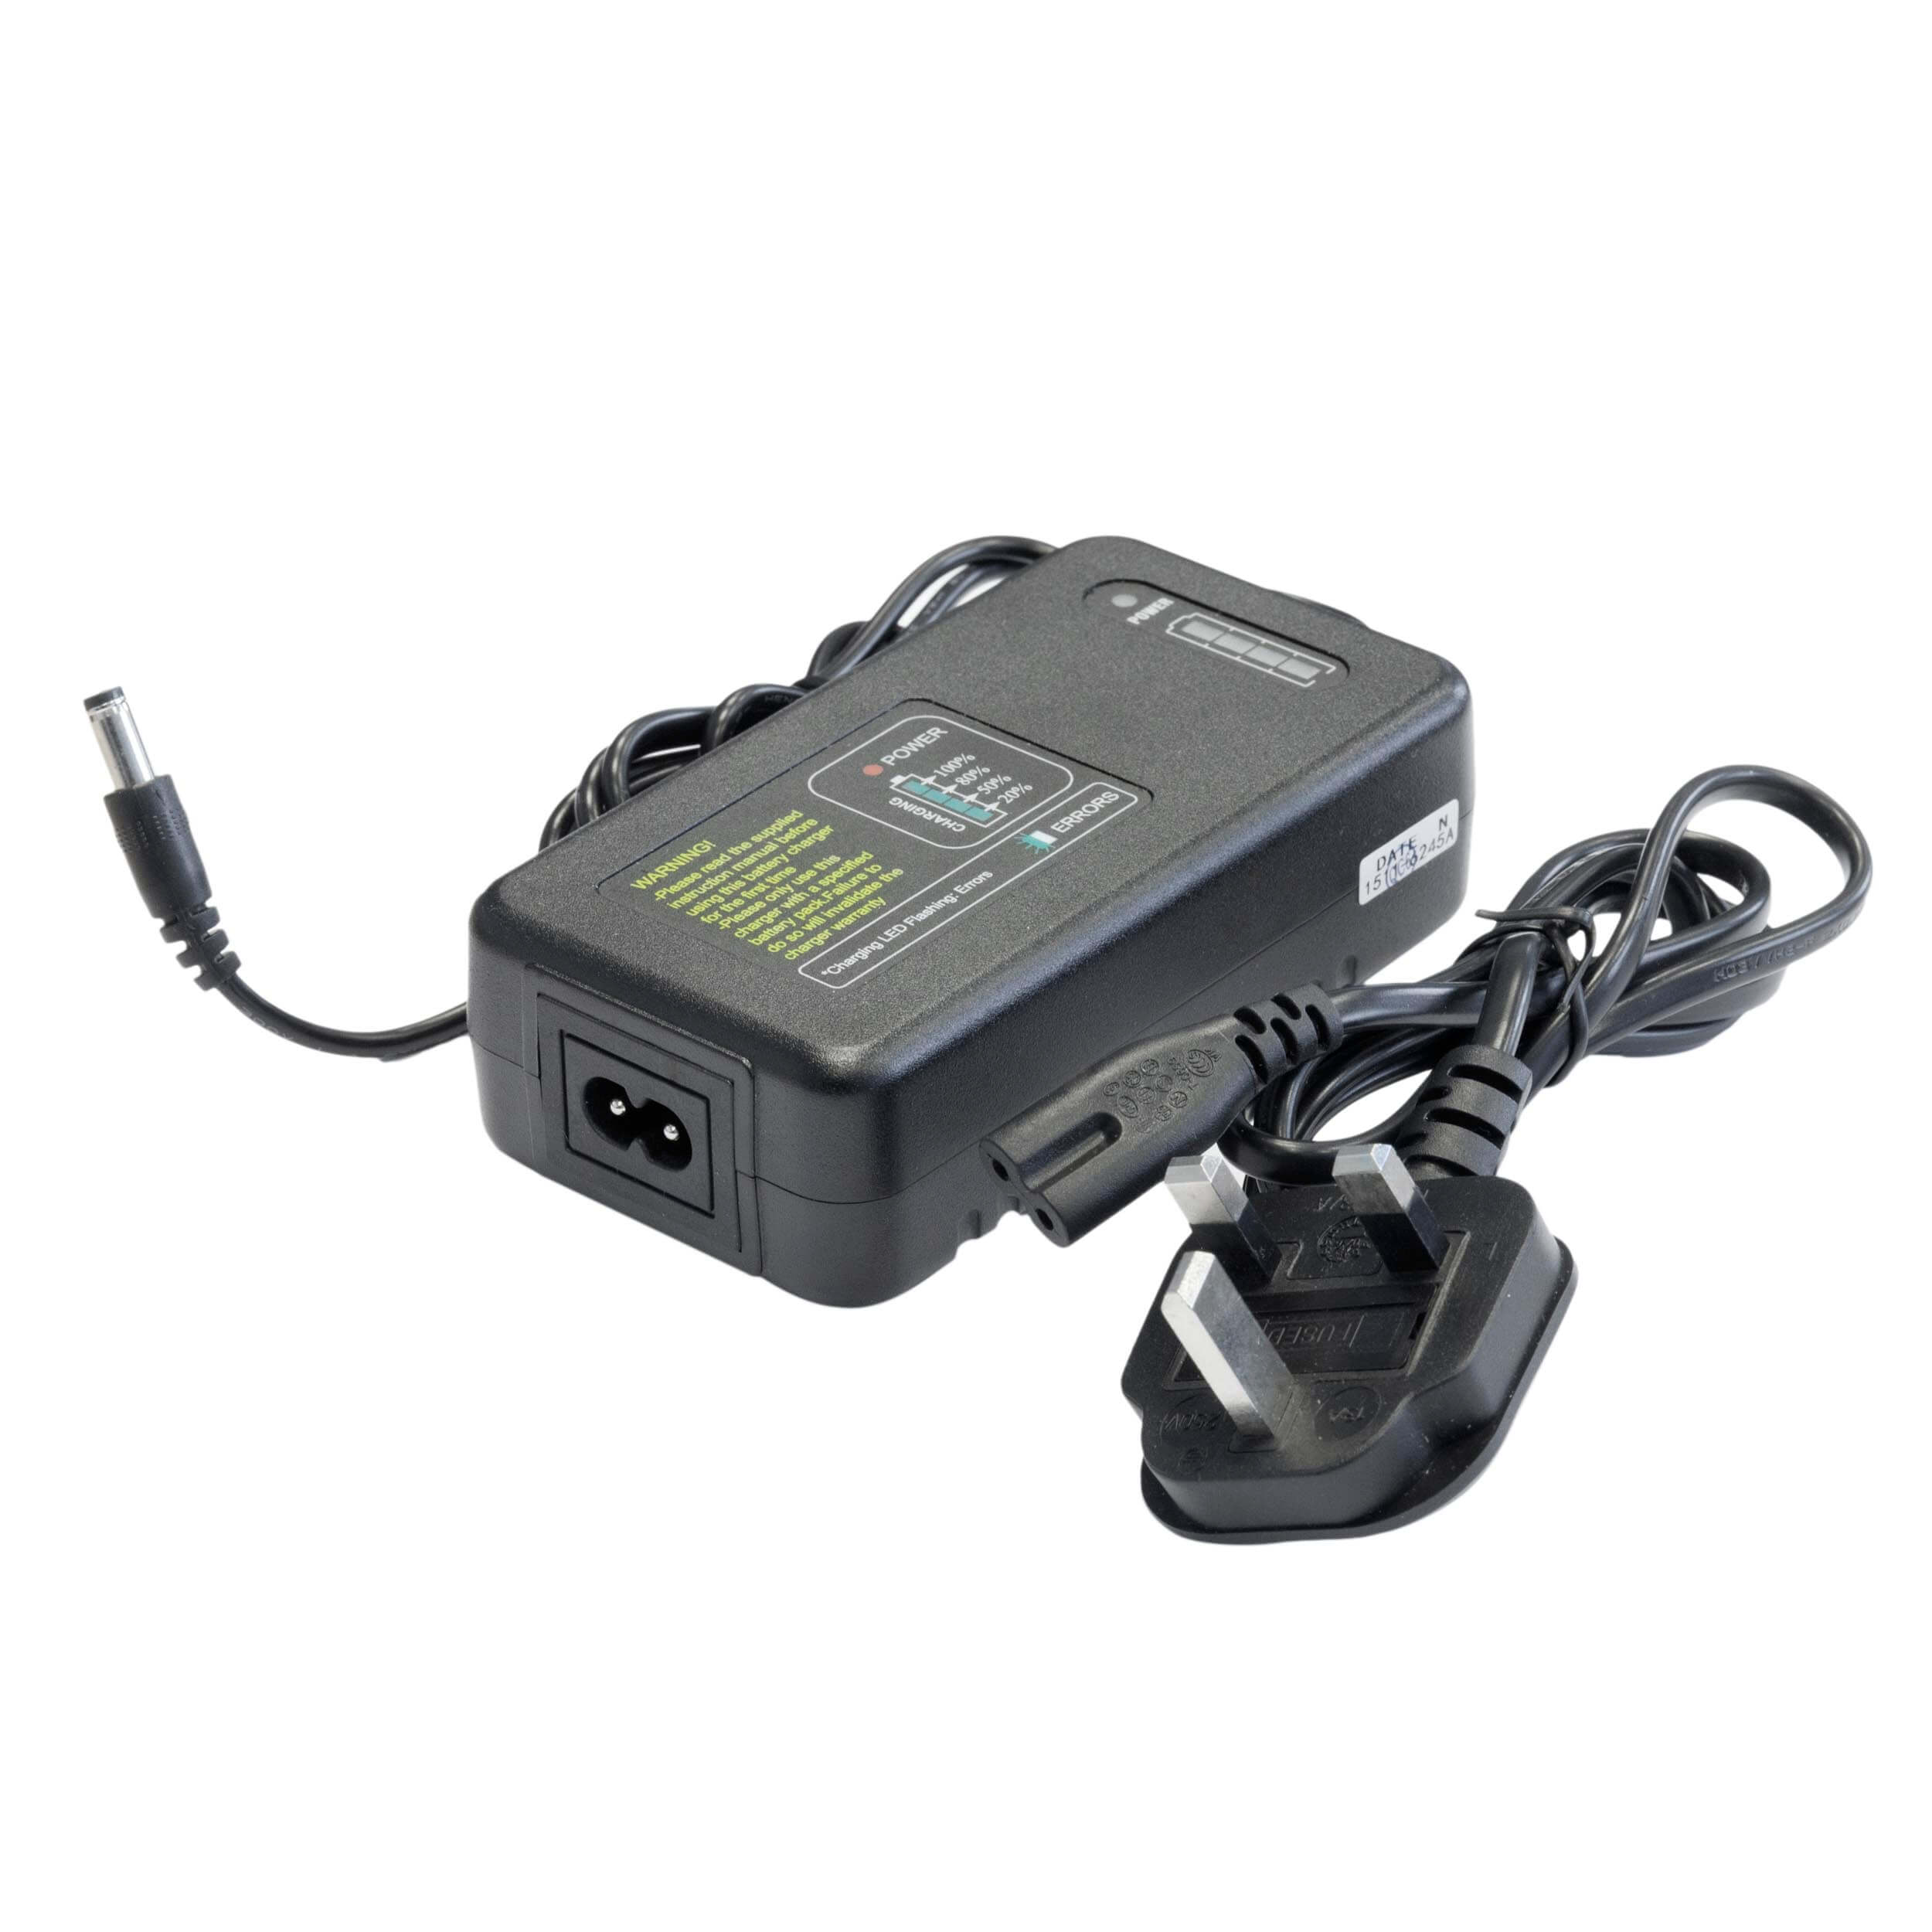 CITI600 All-in-one Battery Charger